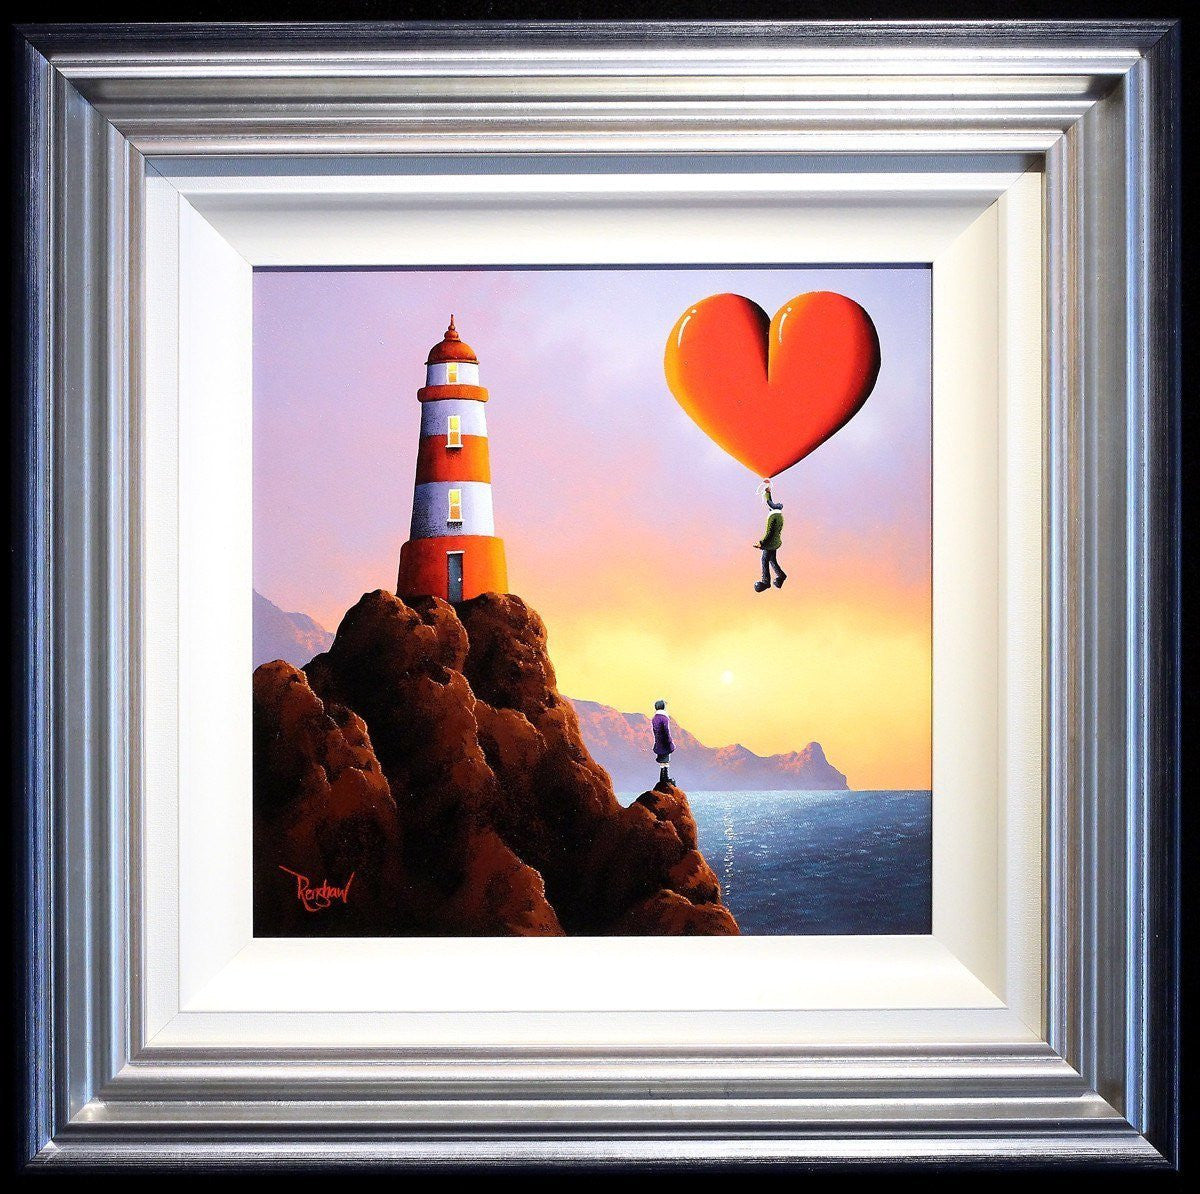 The Lighthouse - SOLD David Renshaw